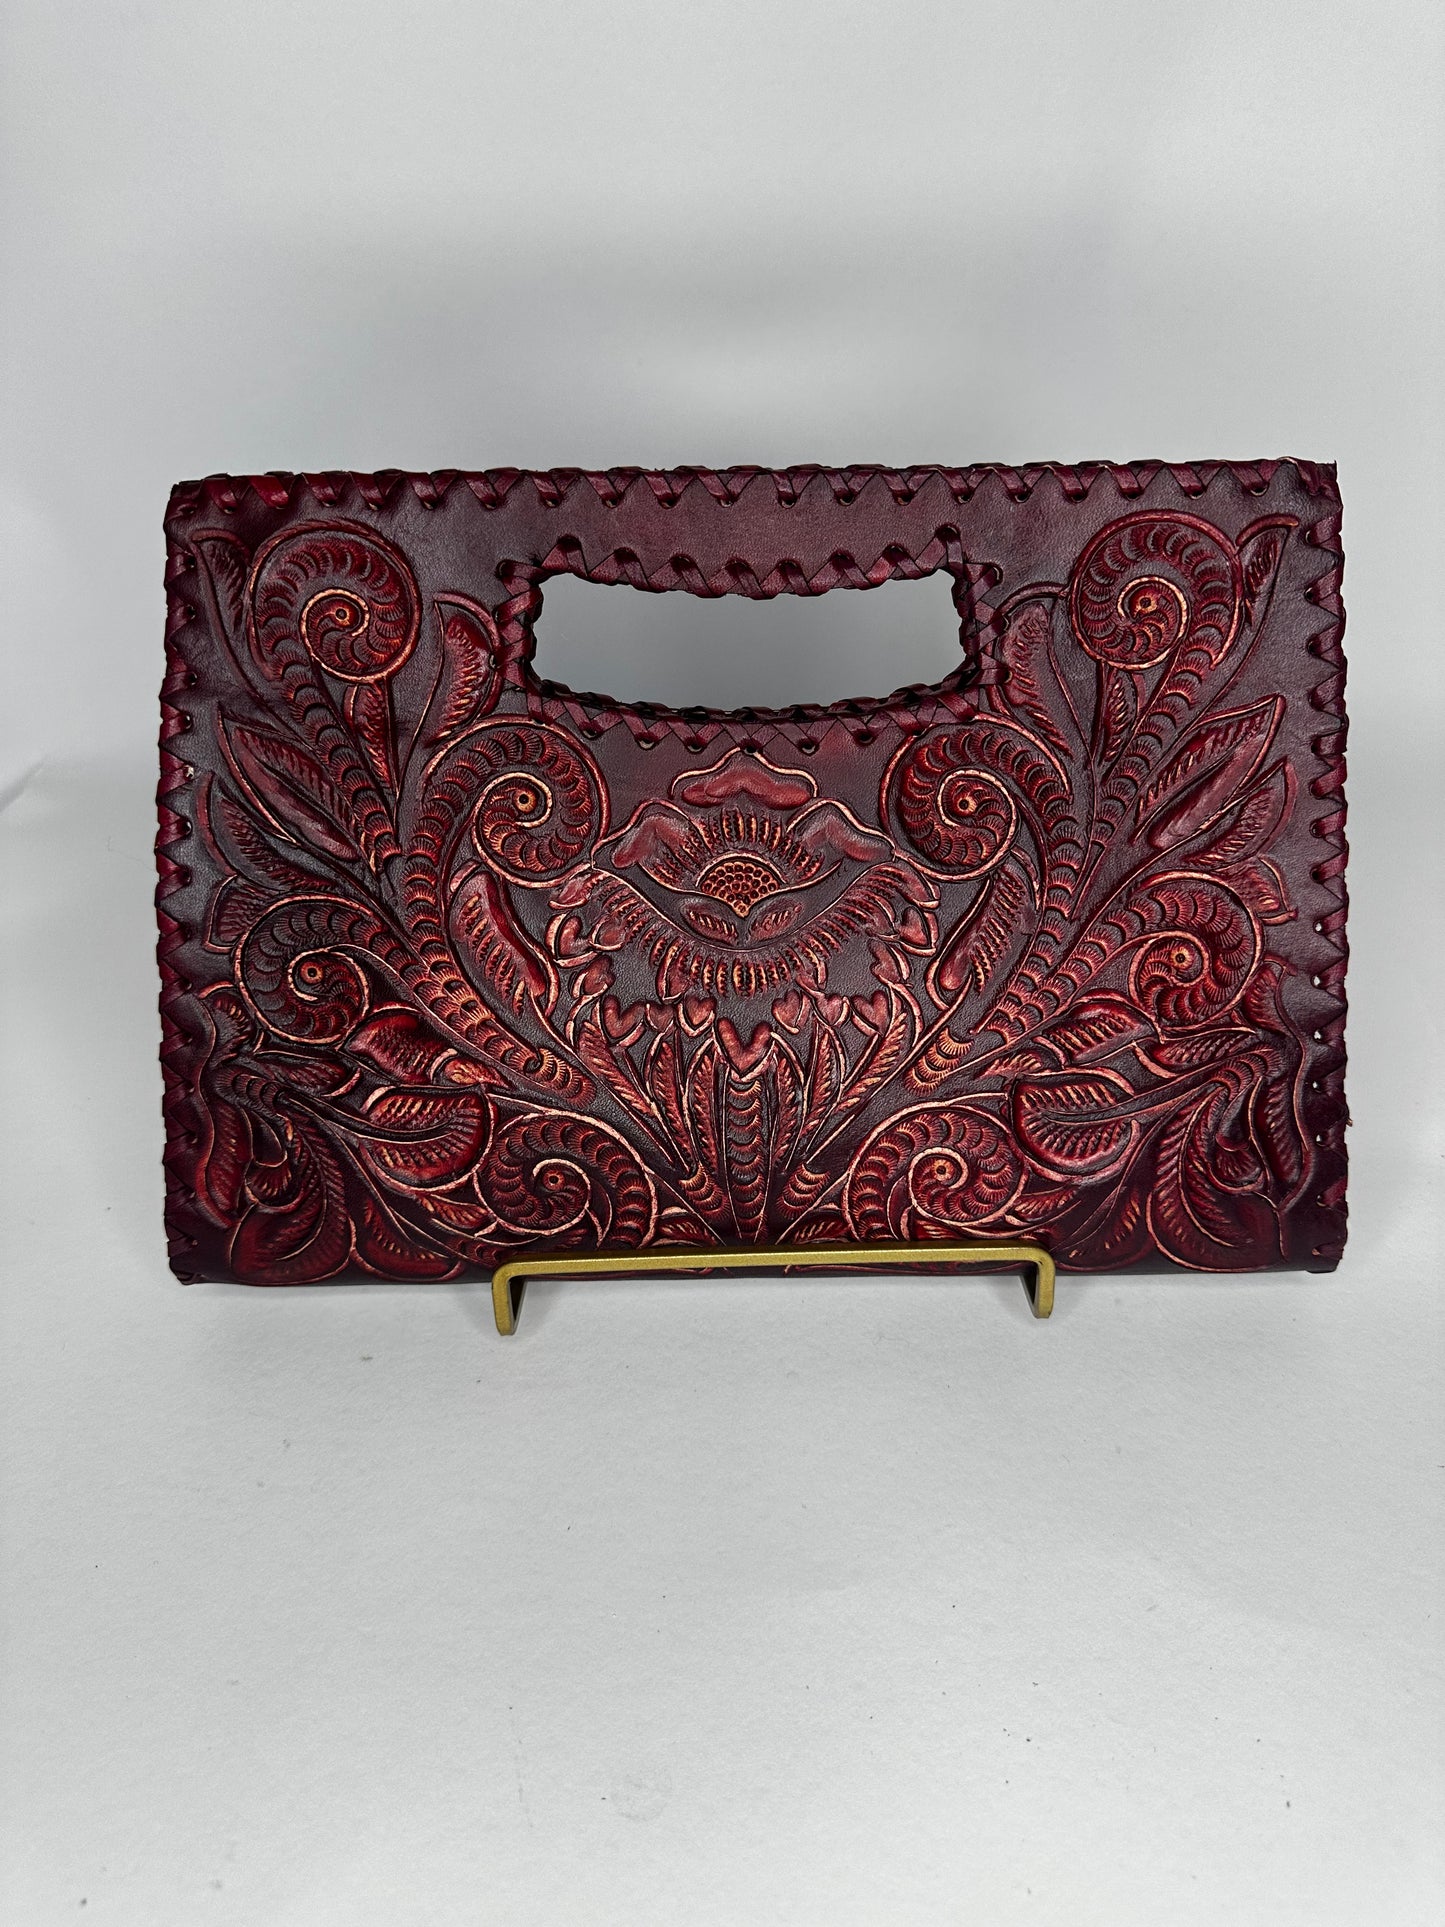 Small Mexican leather handbag with traditional design hand etched throughout the bag. Has handle mid top. leather stitching all around. Color wine red. 